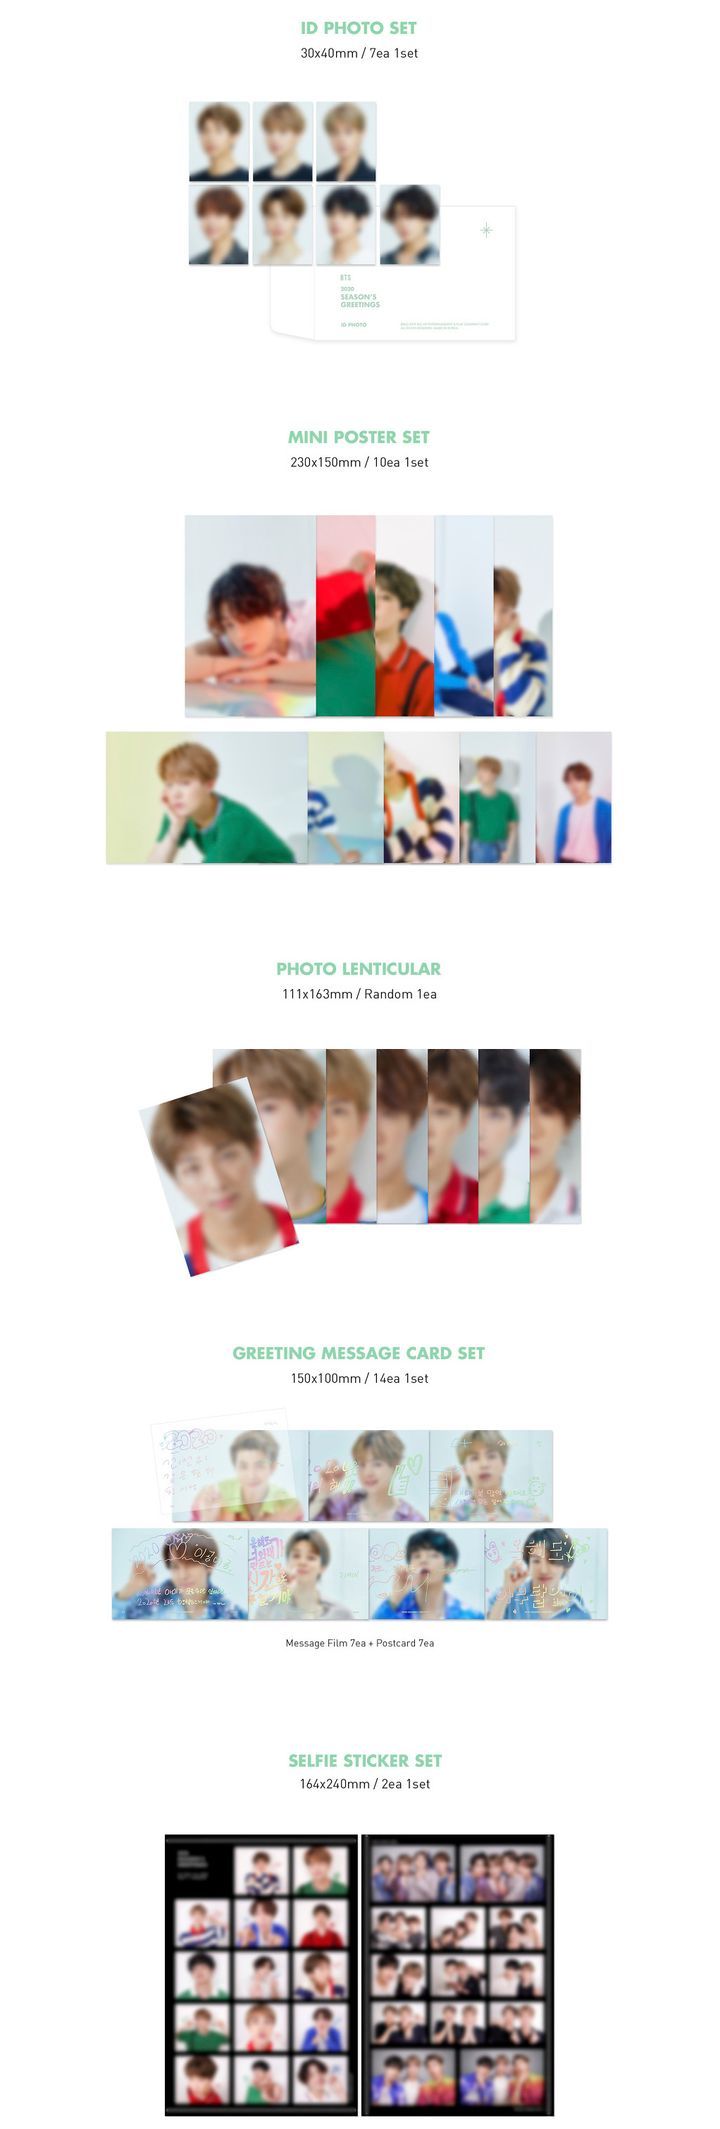 YESASIA: Recommended Items - BTS 2020 Season's Greetings PHOTO